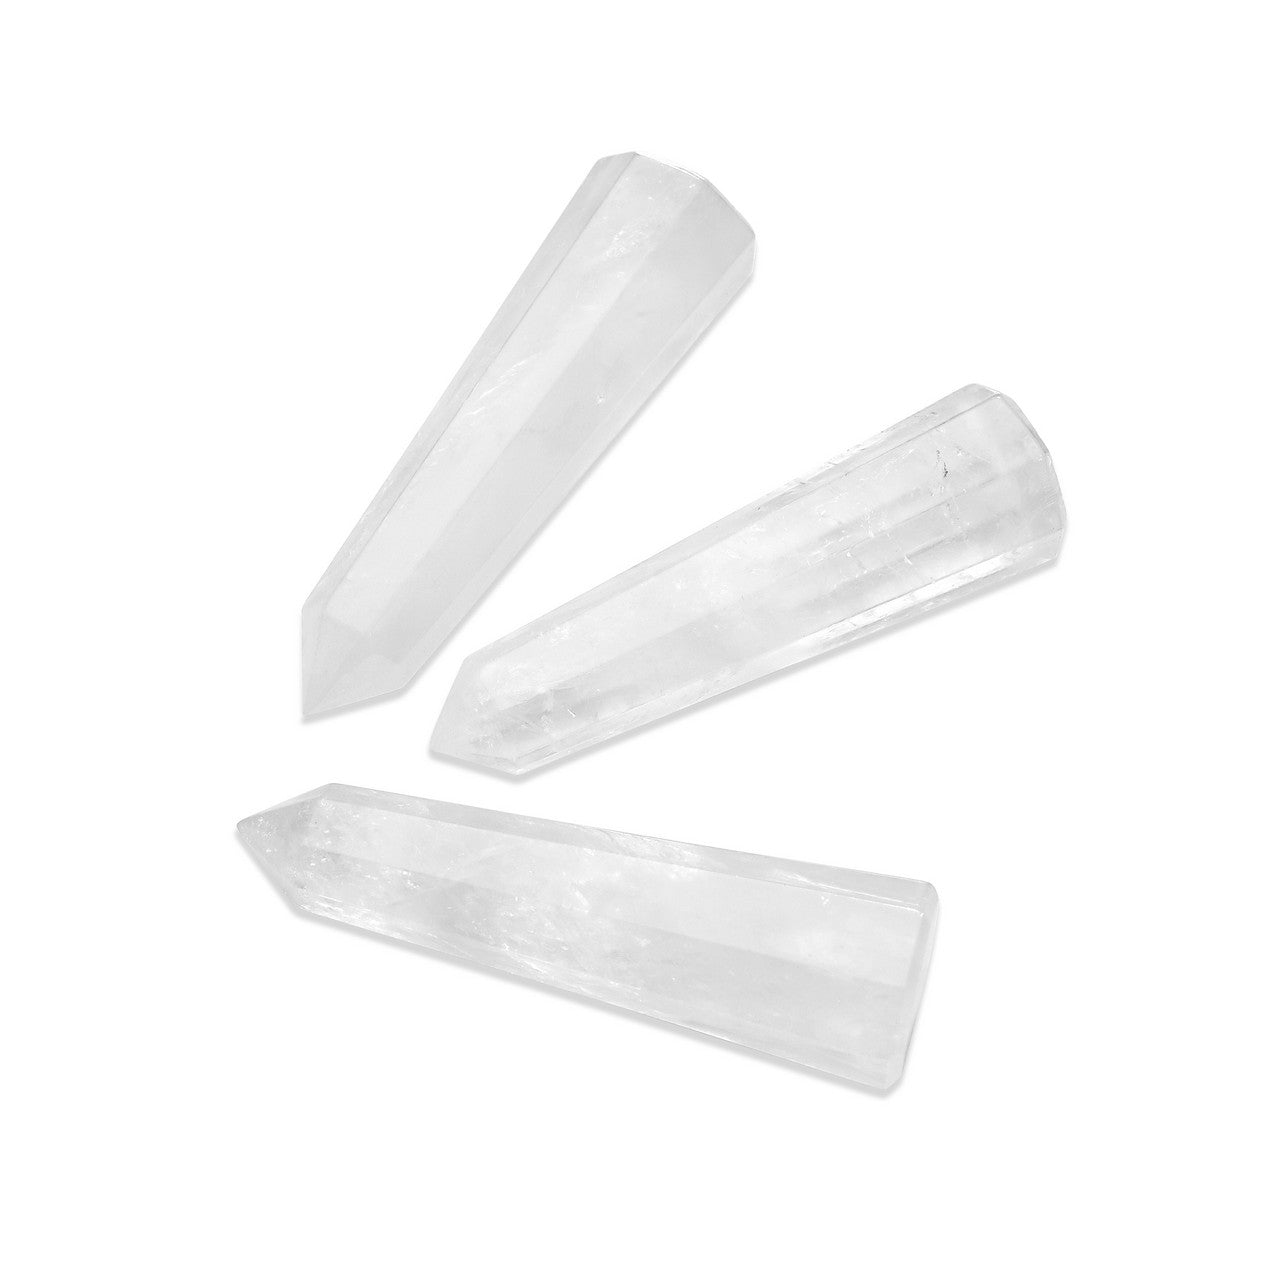 Jovivi Healing Crystal Wands 6 Faceted Reiki Chakra Stones Meditation Therapy